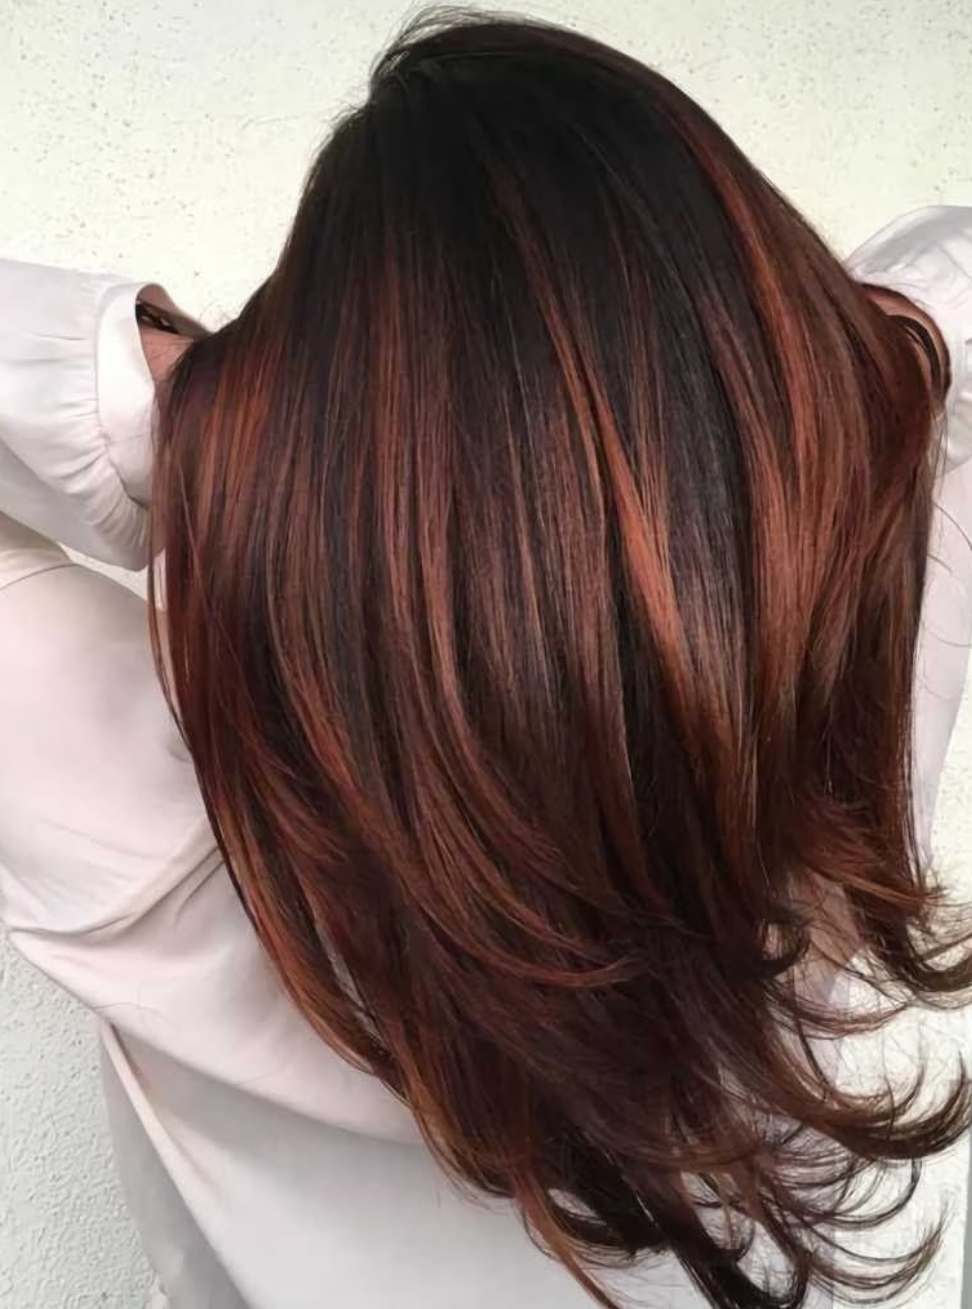 10+ Cool Women's Hair Color Trends That Will Be Hits in 2022